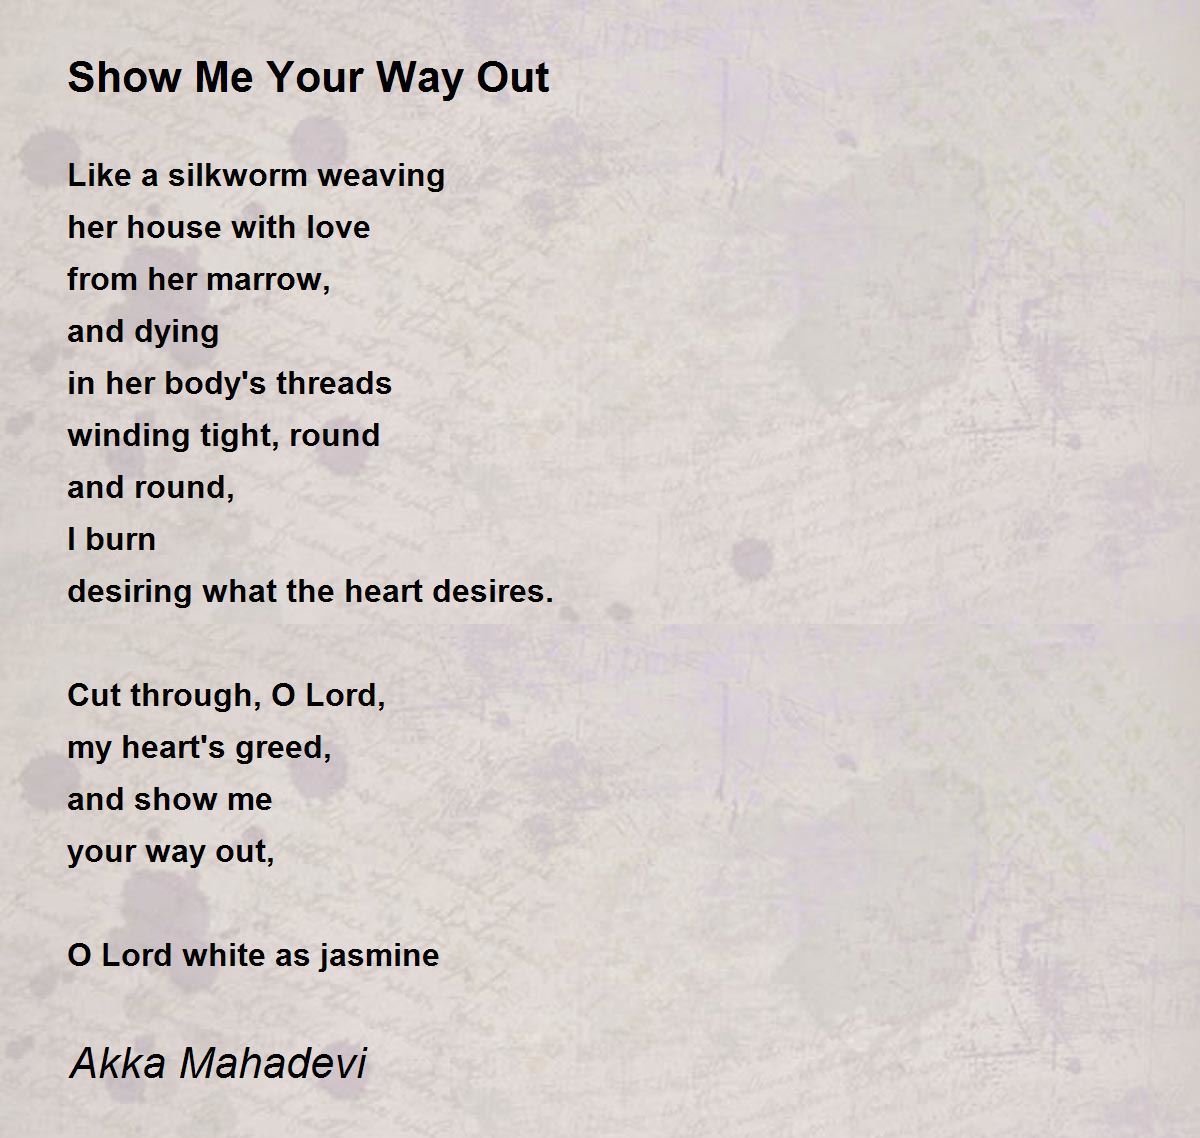 Show Me Your Way Out Poem by Akka Mahadevi - Poem Hunter Comments